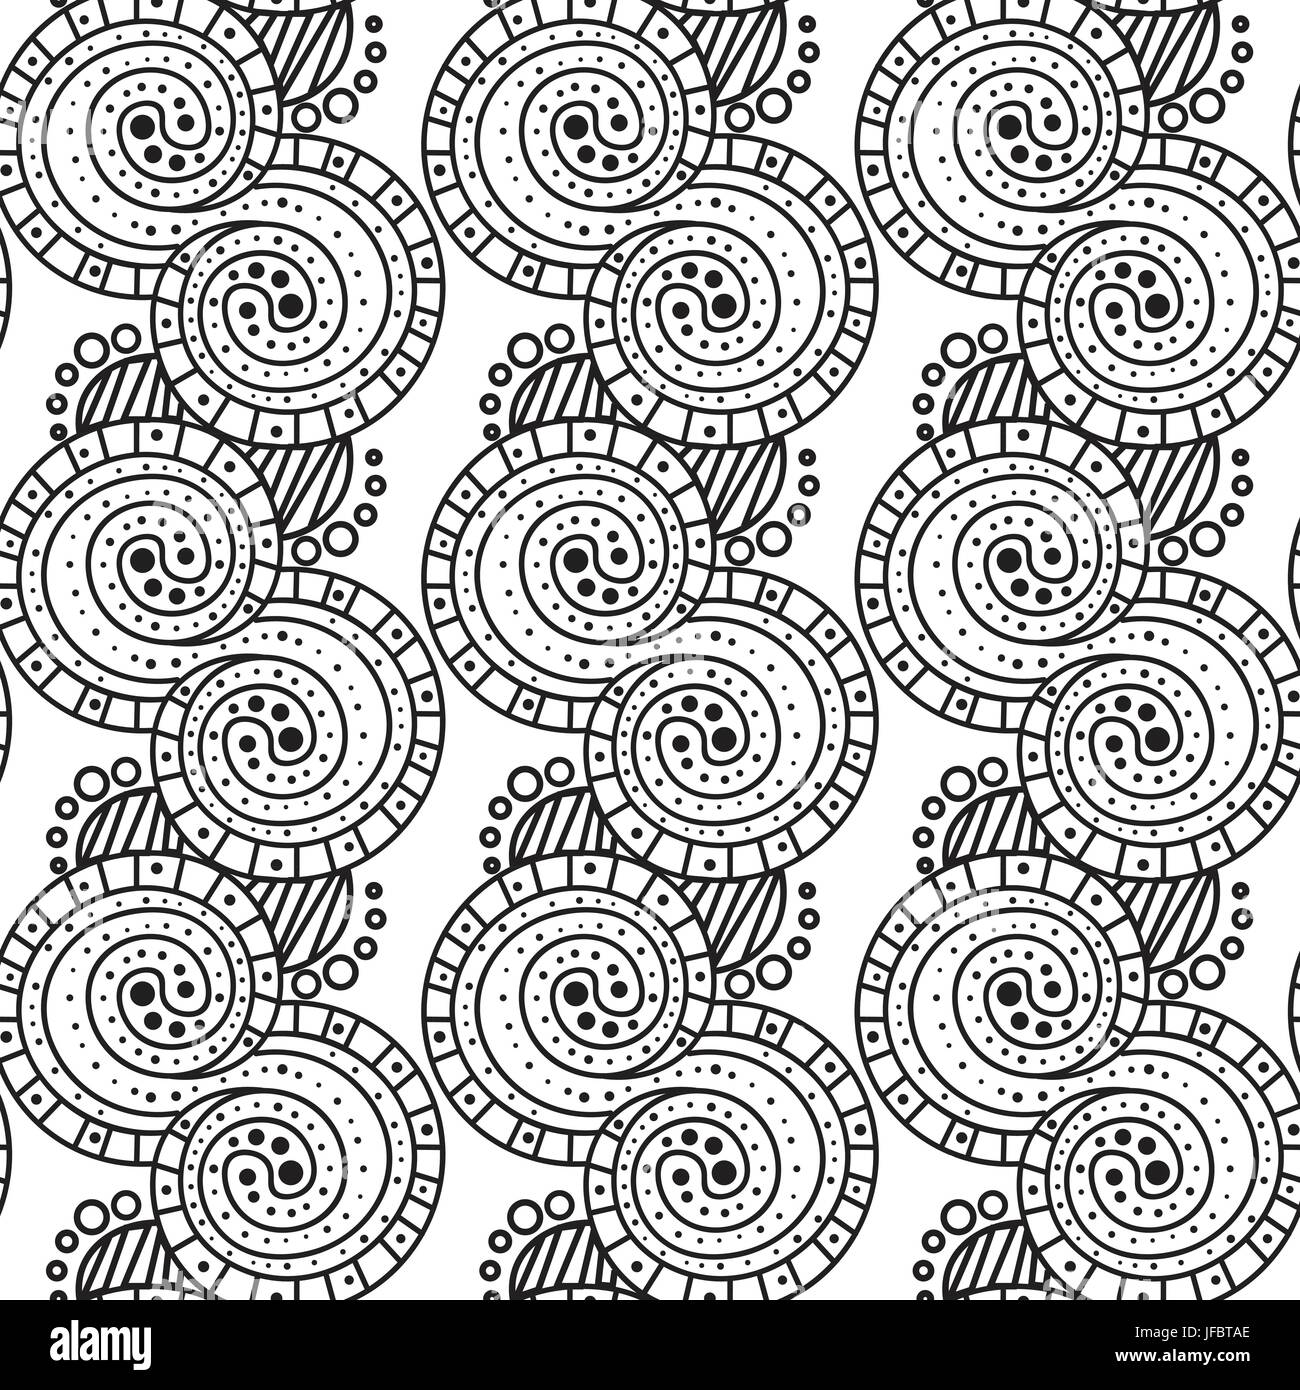 Seamless Black And White Pattern Zentangle Design Stock Vector Image ...